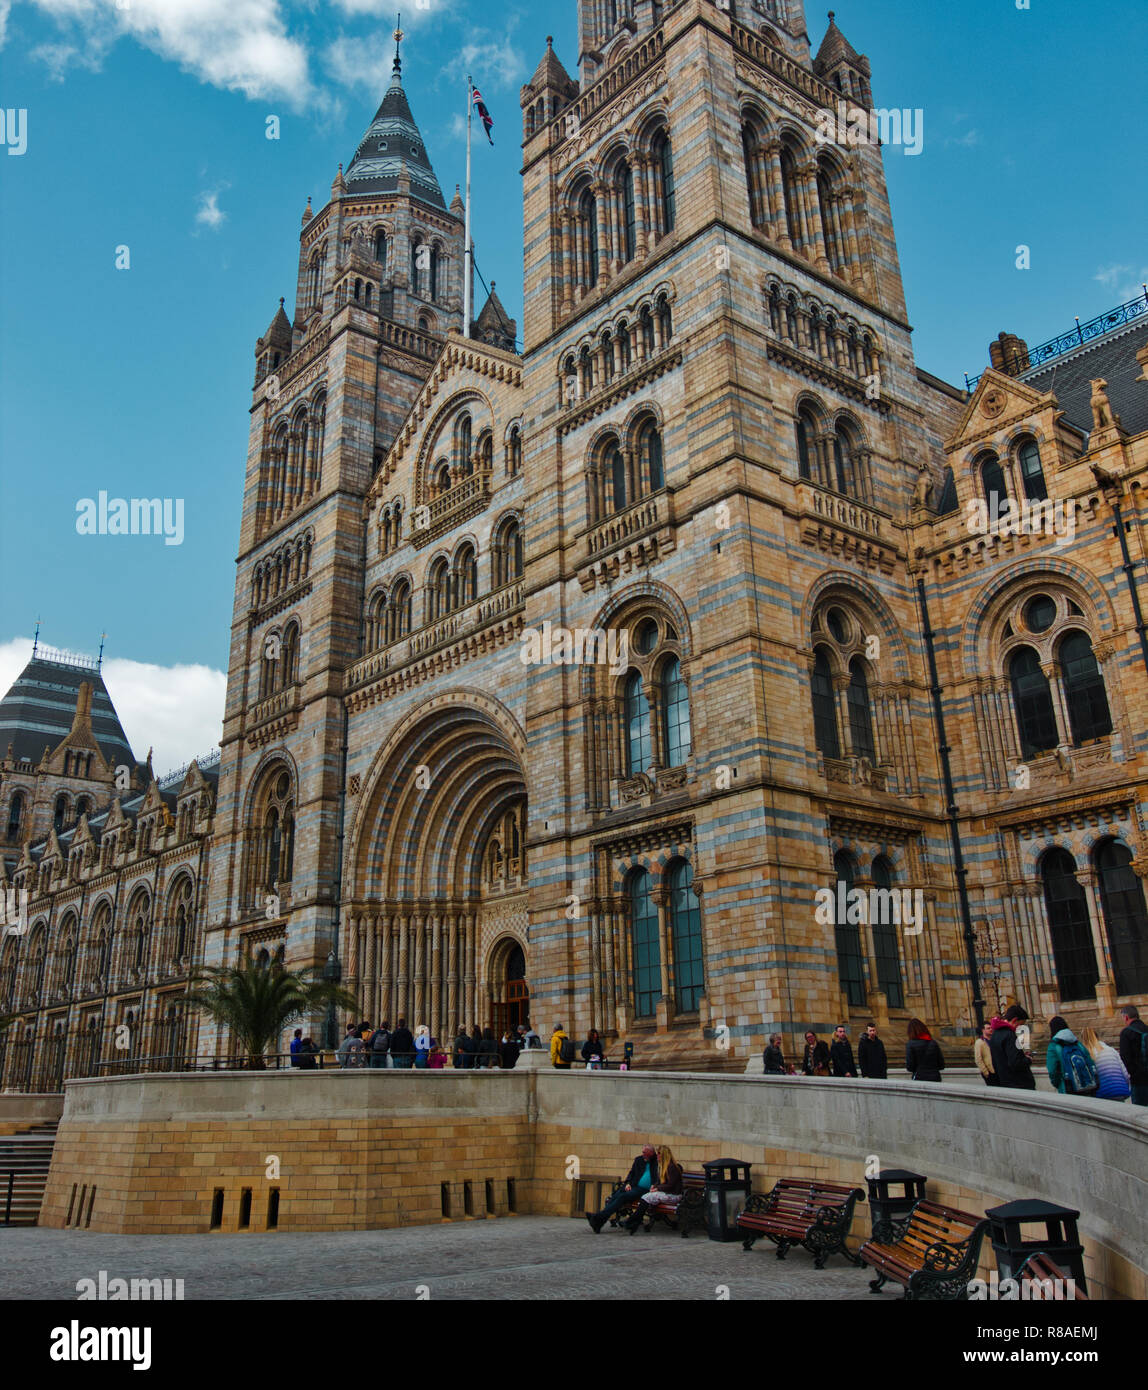 Tourists arriving and leaving the Natural History Museum, South Kensington, London, England Stock Photo